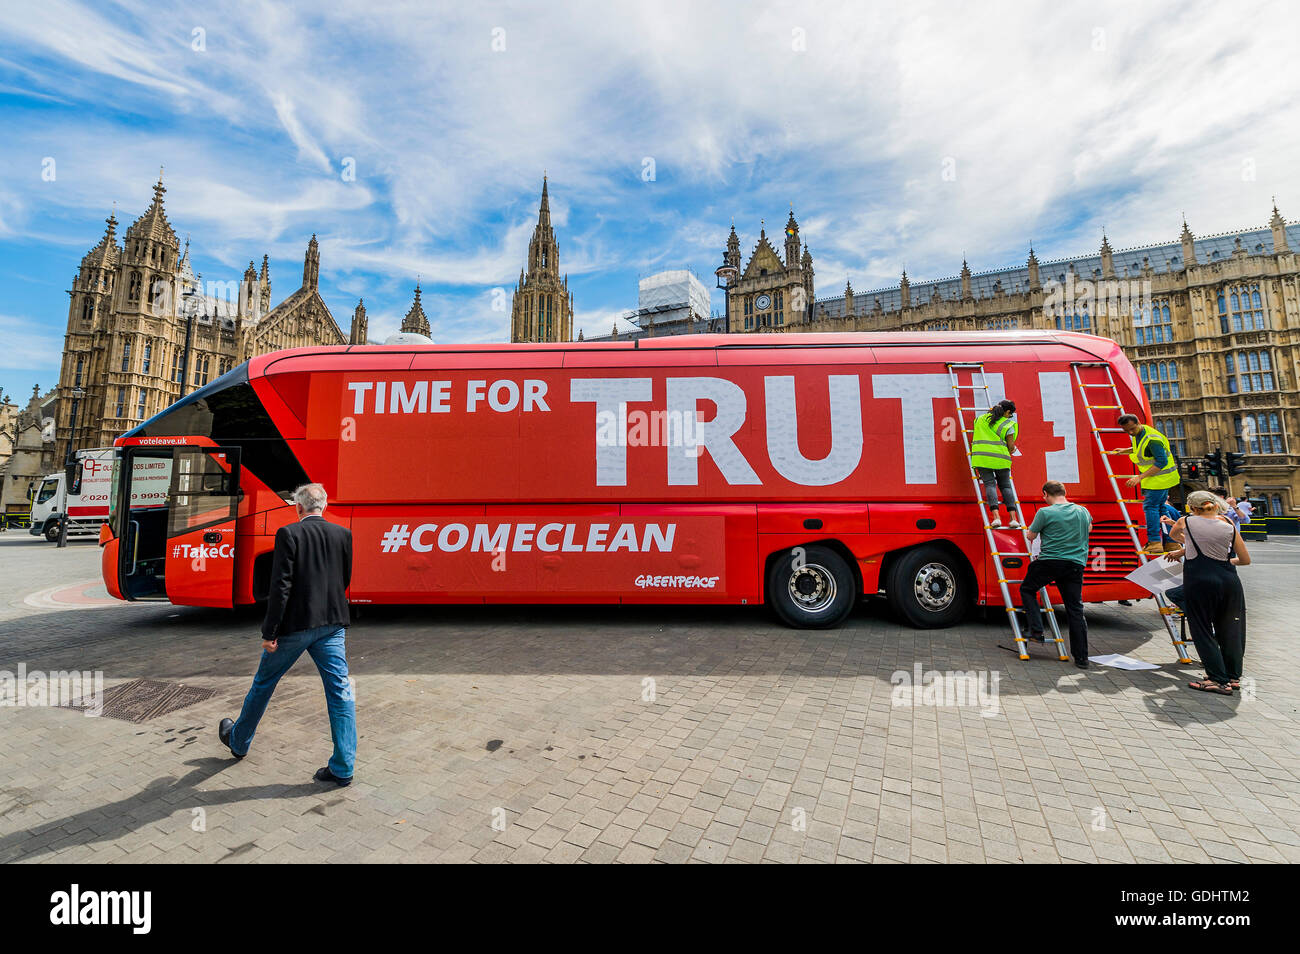 London, UK. 18th July, 2016. John Sauven, executive director of Greenpeace UK, strides past the bus - The Brexit ‘Vote Leave’ battle bus (used by Boris Johnson) has been acquired by Greenpeace was re-branded outside Parliament. The £350m NHS claim was covered with thousands of questions for the new government from Leave and Remain voters – many of them about what Brexit means for the environment. The questions, written on stickers, are forming a montage that will spell out the words ‘TIME FOR TRUTH’ in huge white letters on the side of the bus. The bus was parked by Old Palace Yard, Westminste Stock Photo